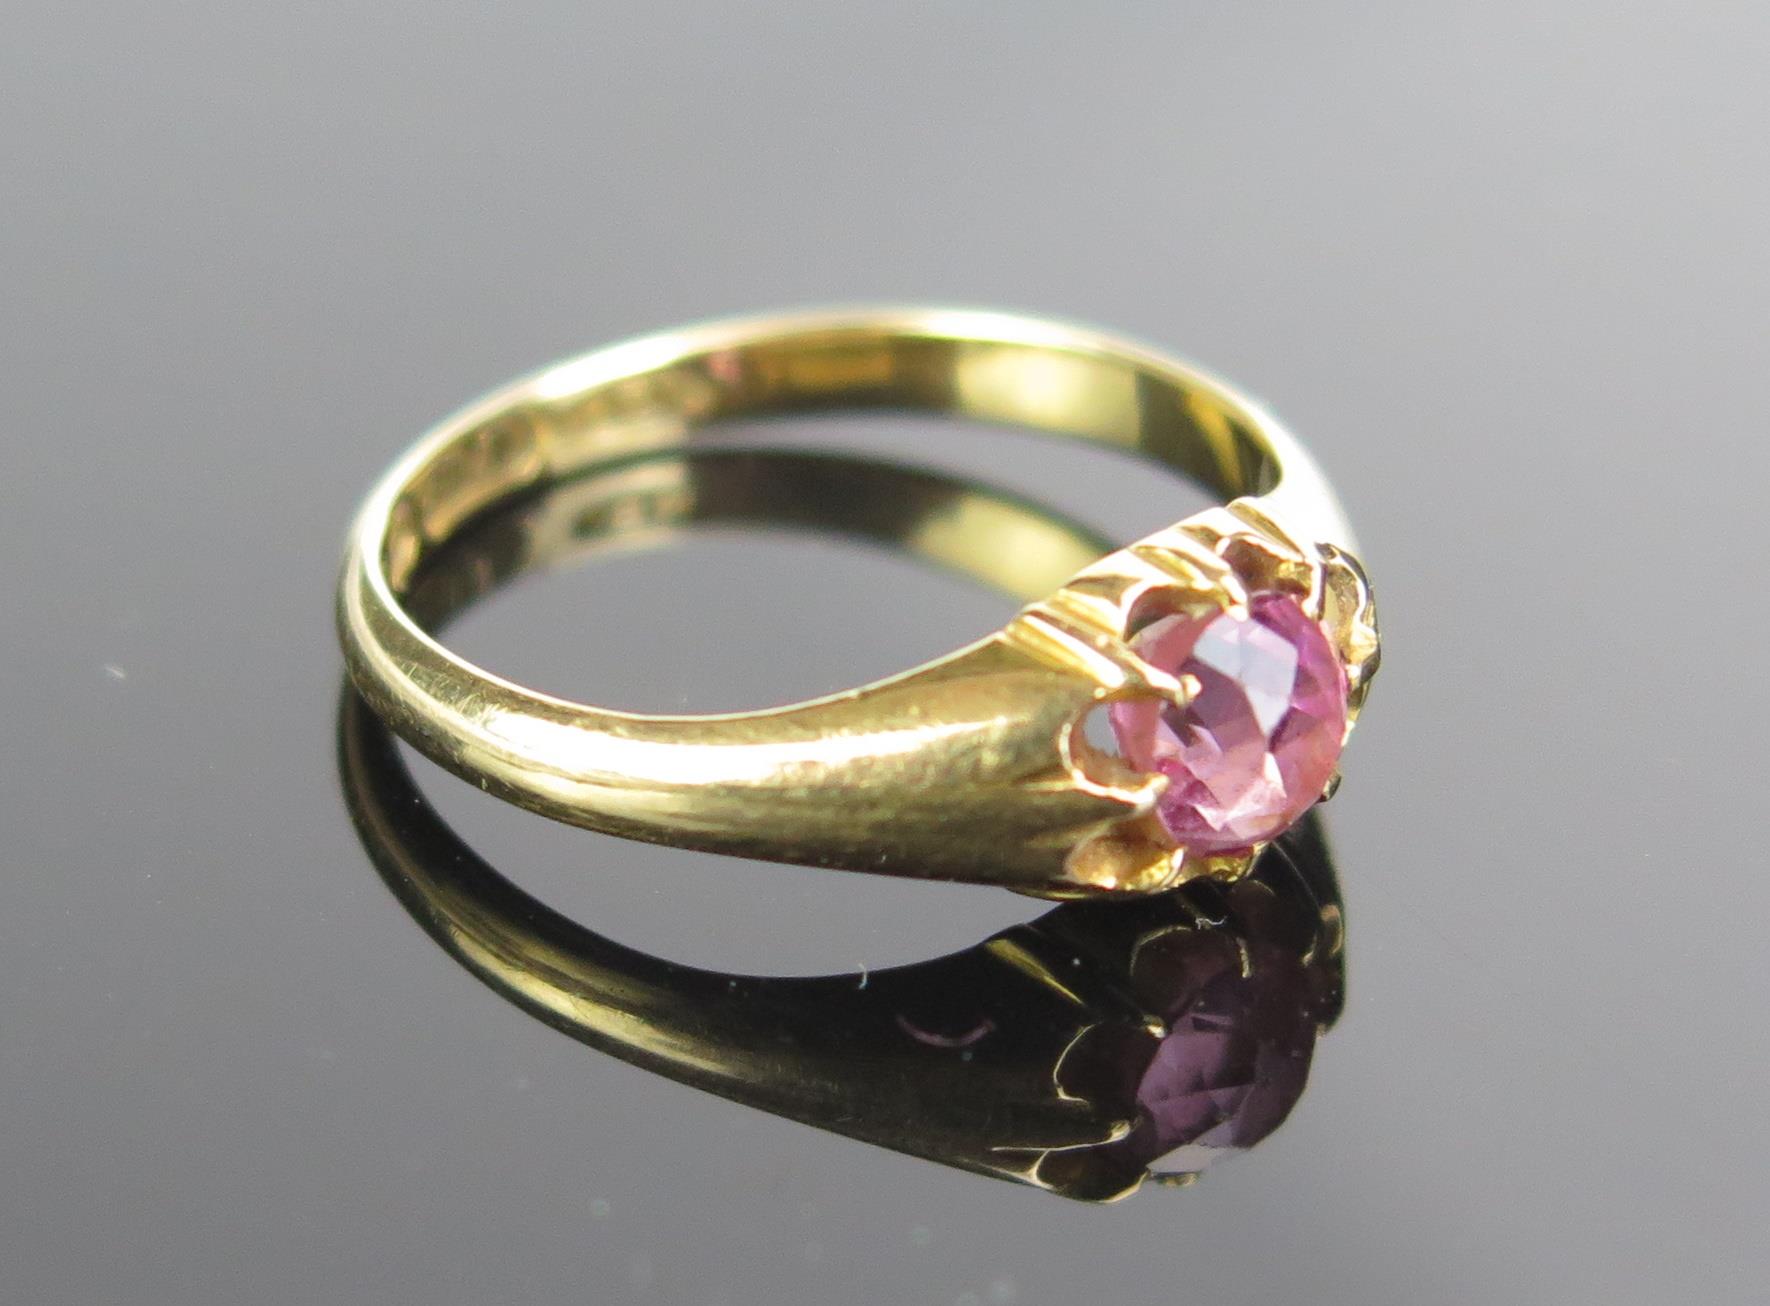 A Victorian 18ct Gold and Pink Tourmaline Ring, 5mm stone, Birmingham 1896, maker NBs, size L, 3g - Image 2 of 2